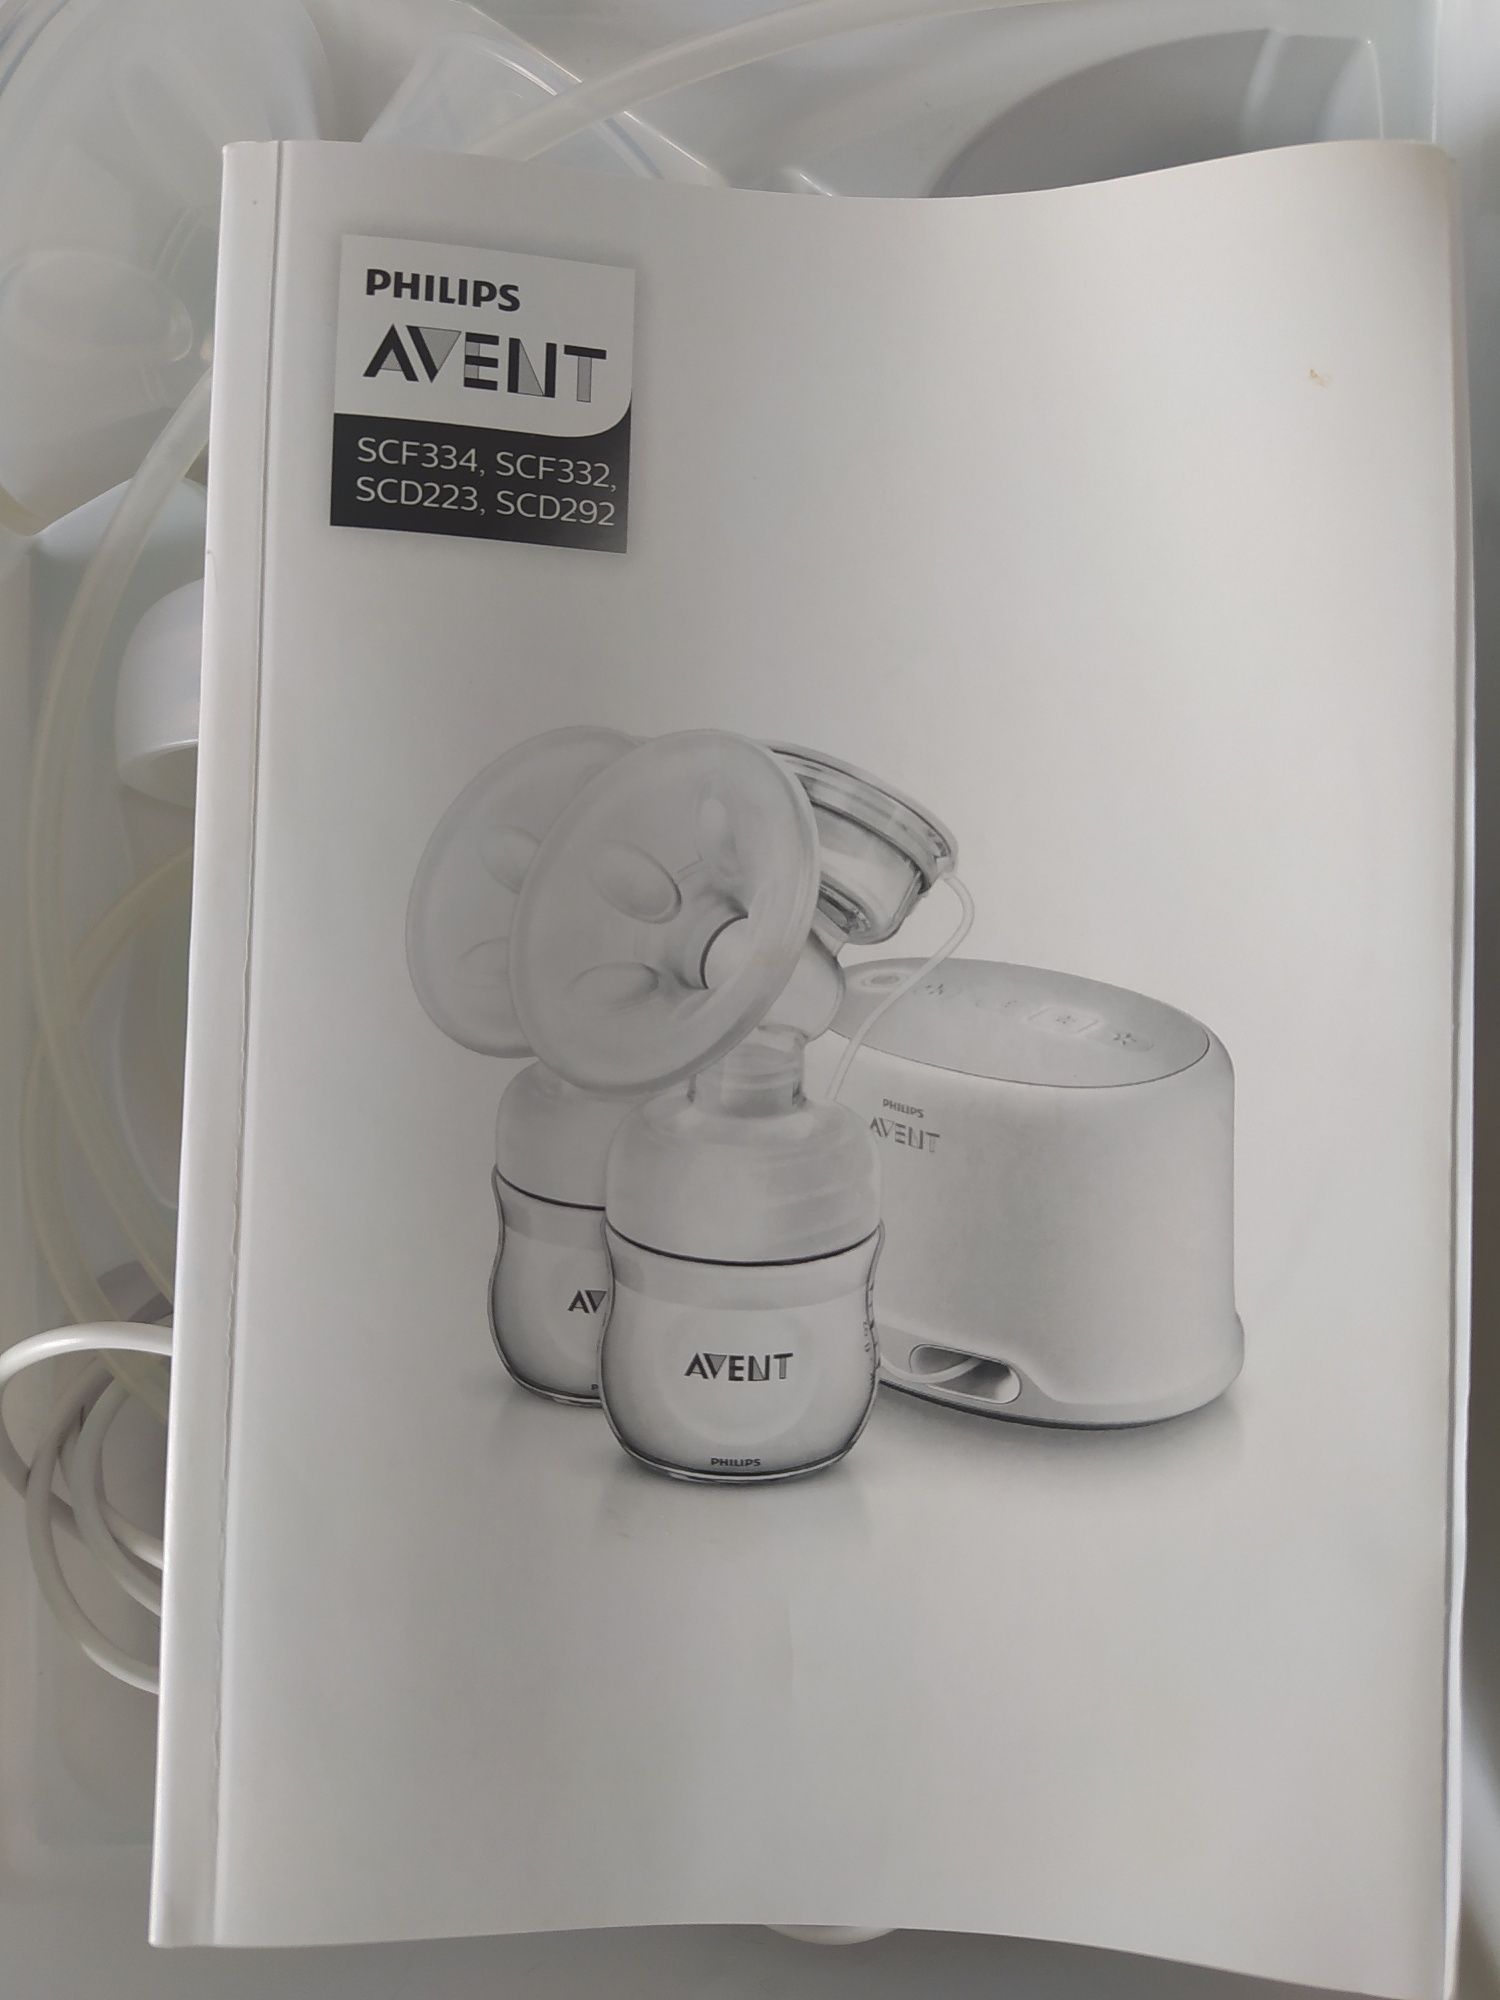 Pompa san electrica Philips Avent